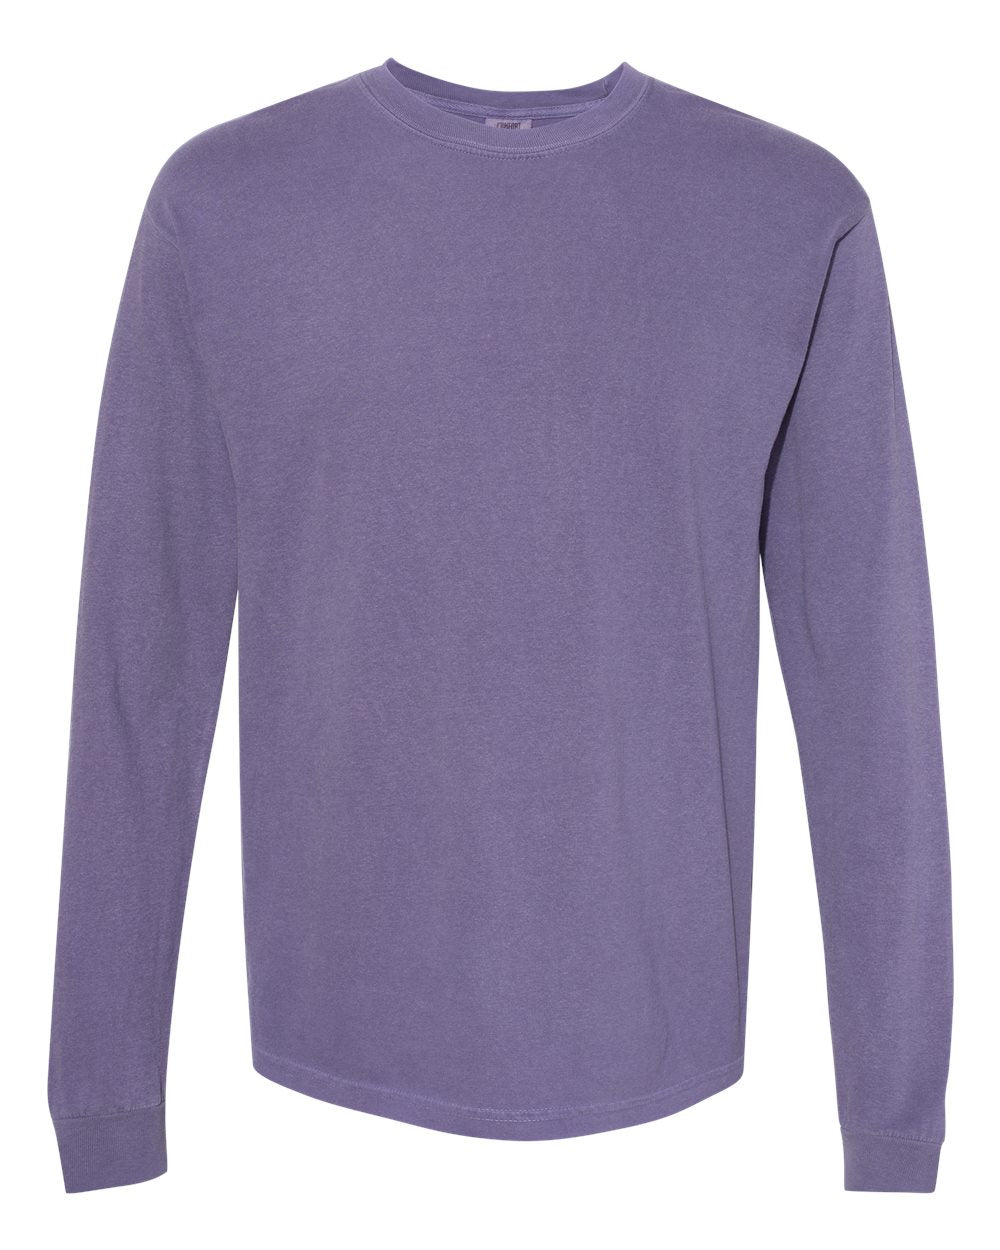 Comfort Colors Long Sleeve Tee (No Pocket) - Kite and Crest